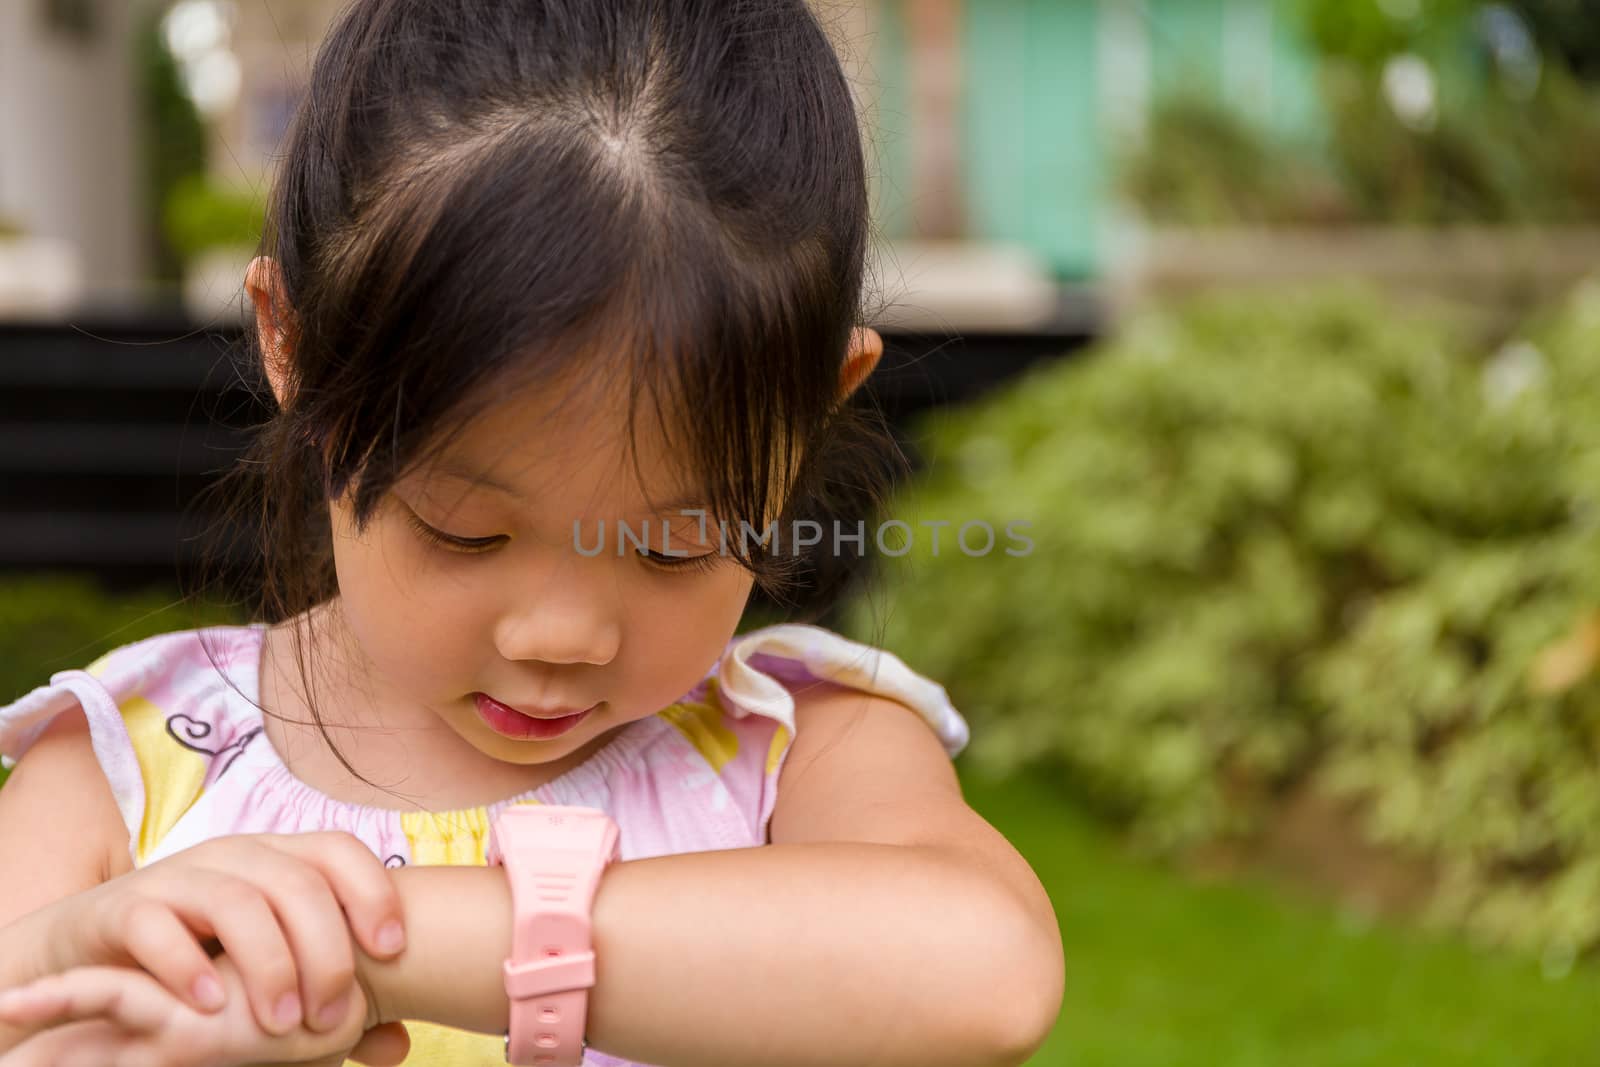 Child Using Smartwatch or Smart Watch / Child with Smartwatch or by supparsorn